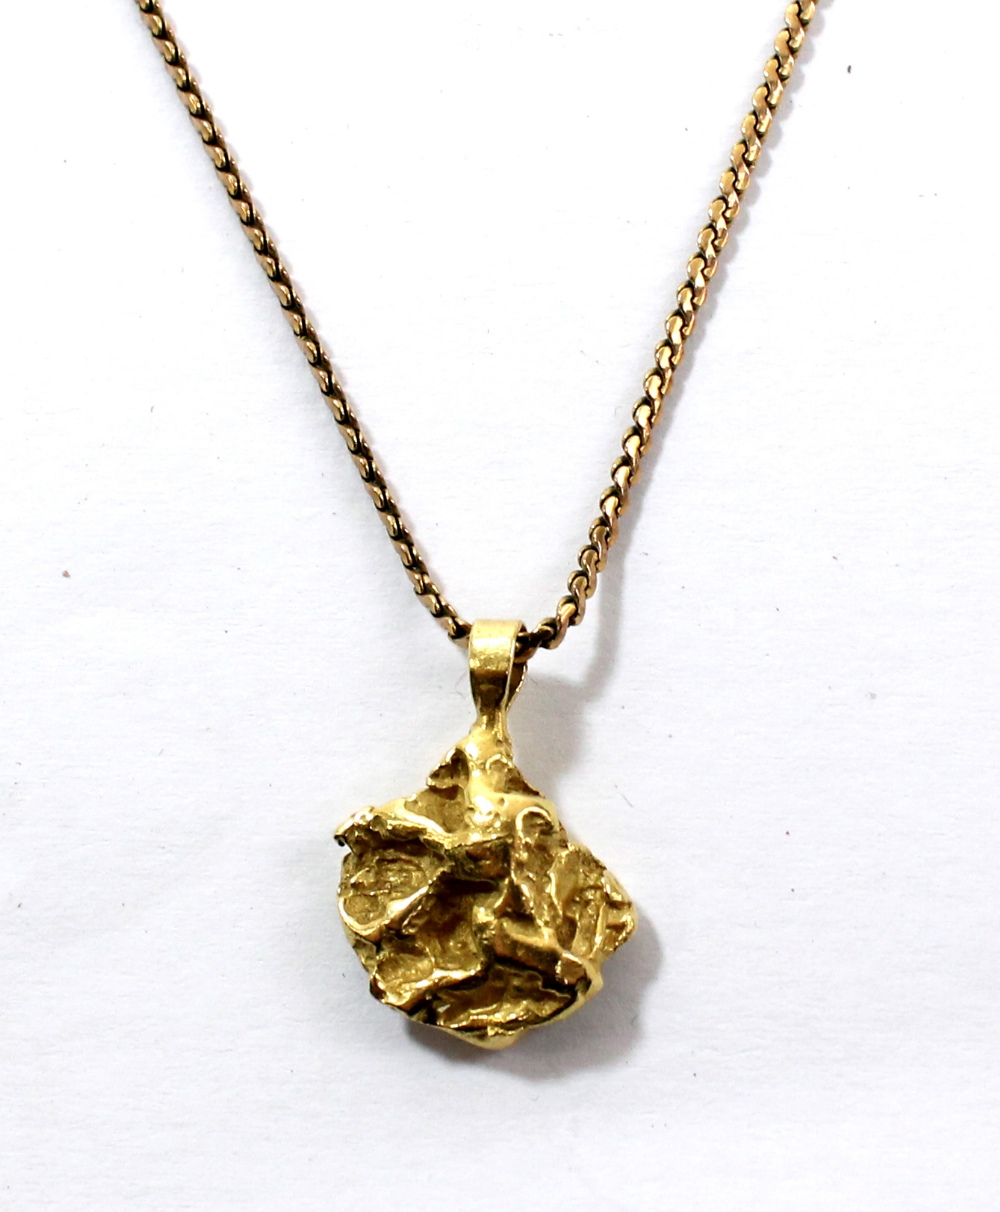 A yellow metal nugget pendant with indistinct stamp to bail suspended on a yellow metal chain